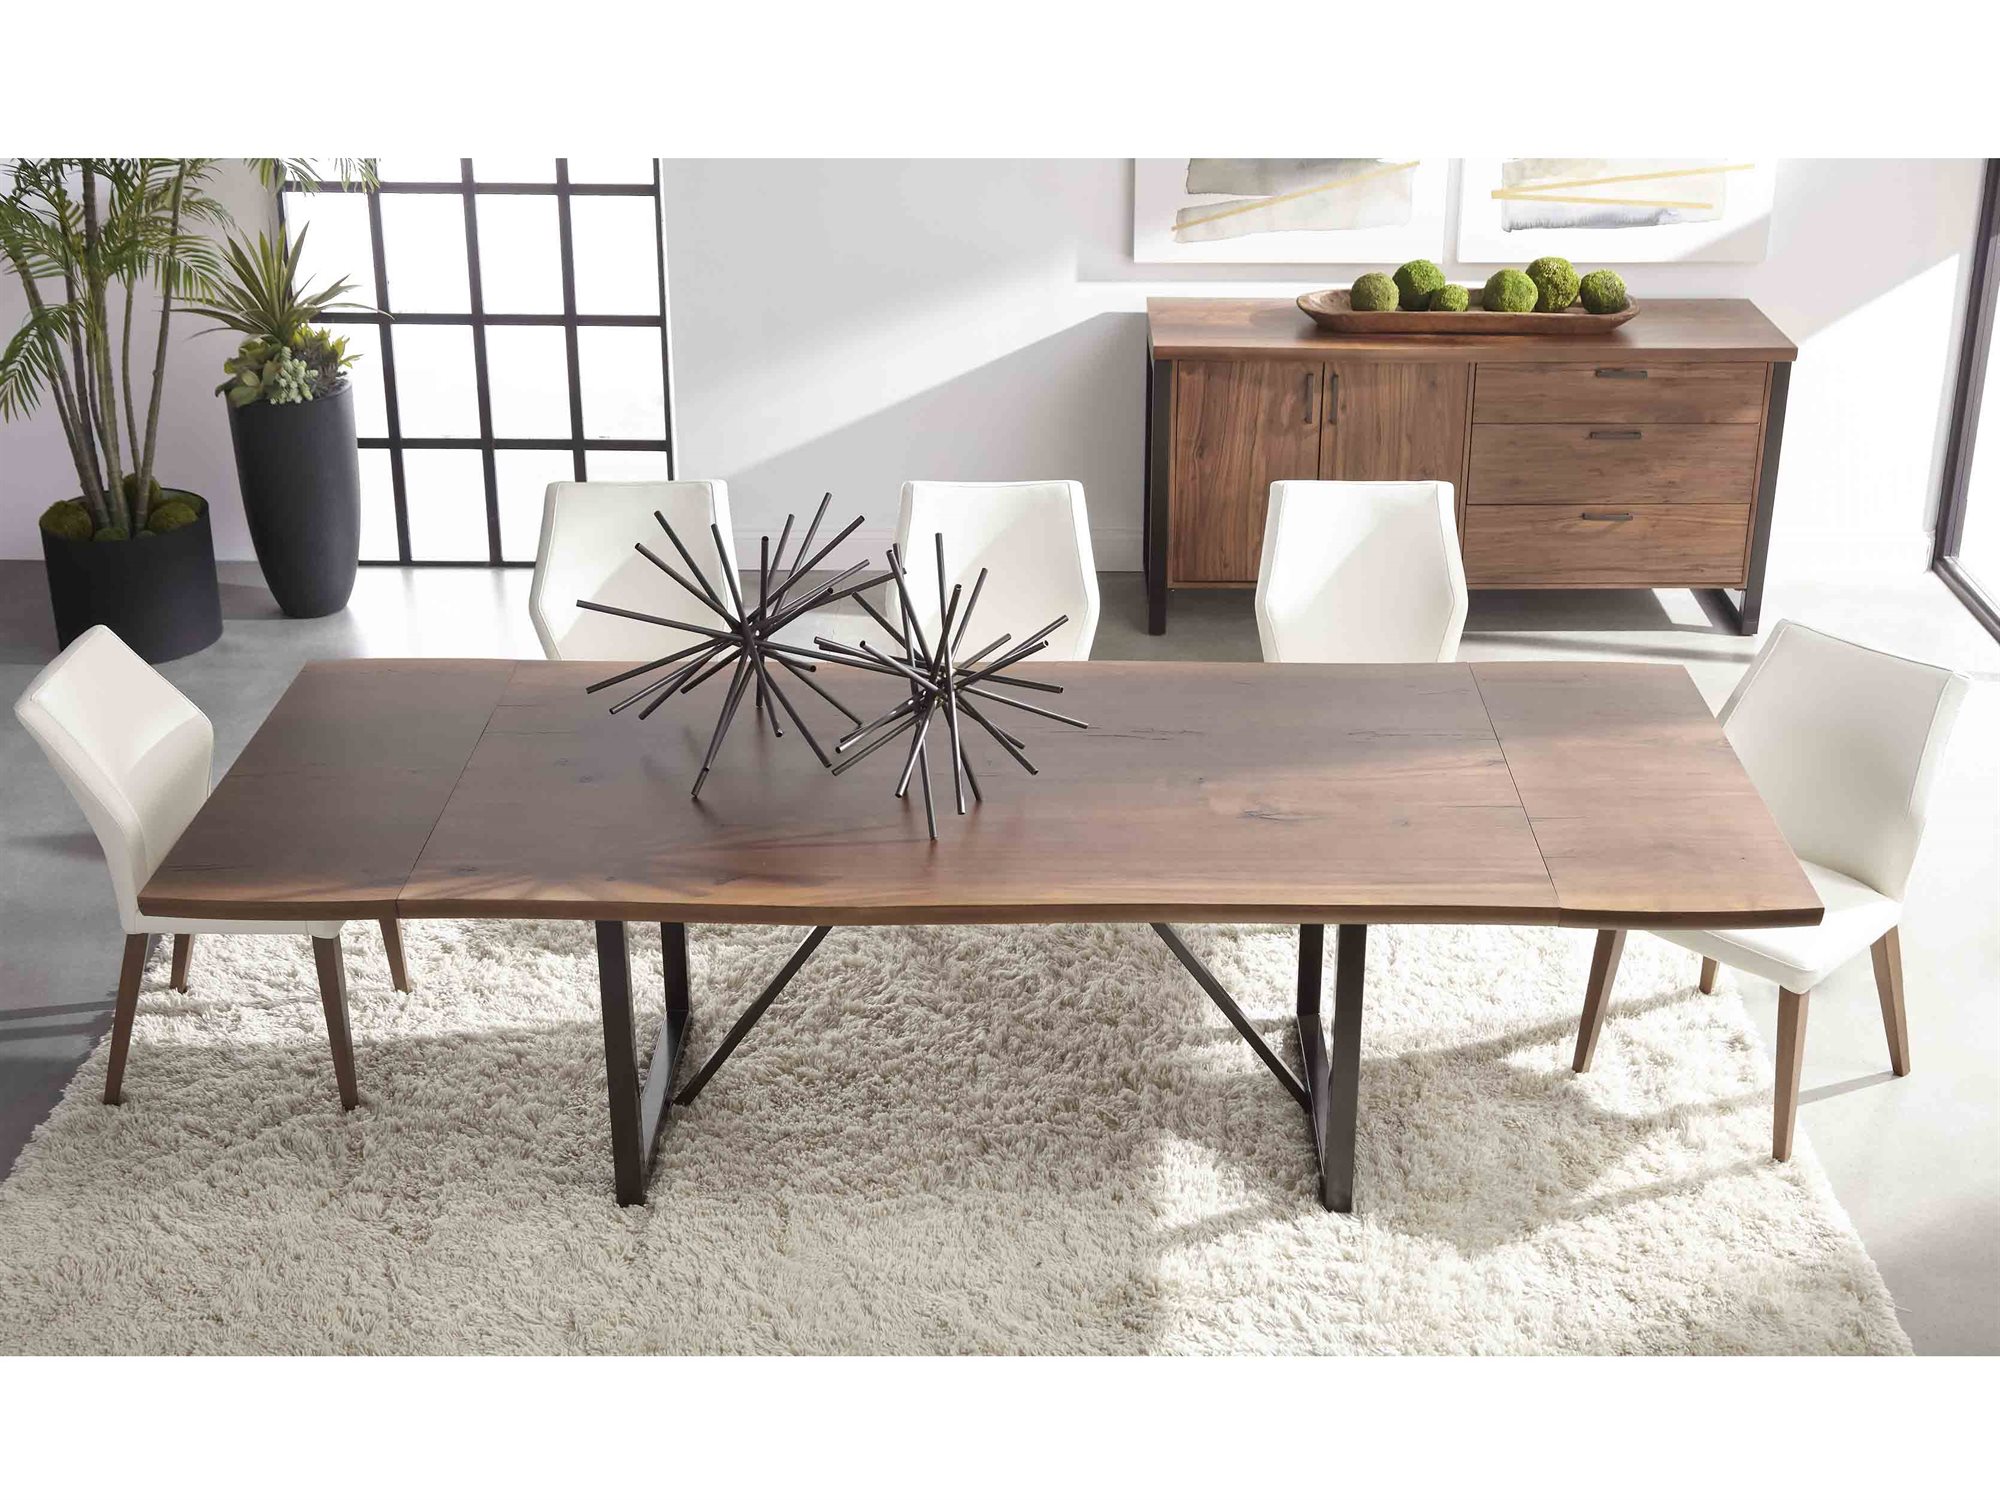 Essentials for Living Traditions Modern Casual Dining Room Set